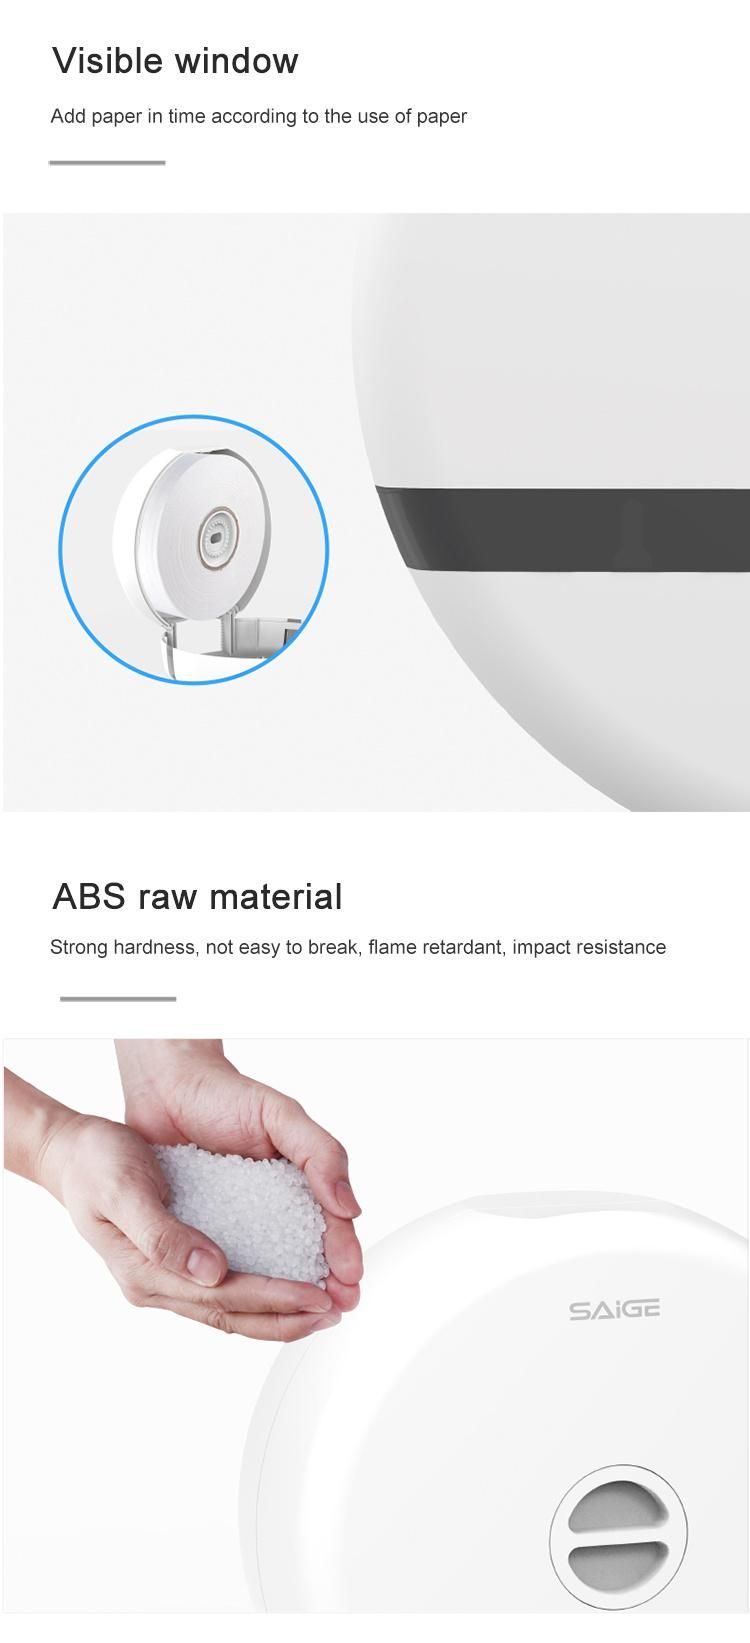 Saige New Arrival Wall Mounted ABS Plastic Toilet Jumbo Roll Paper Dispenser